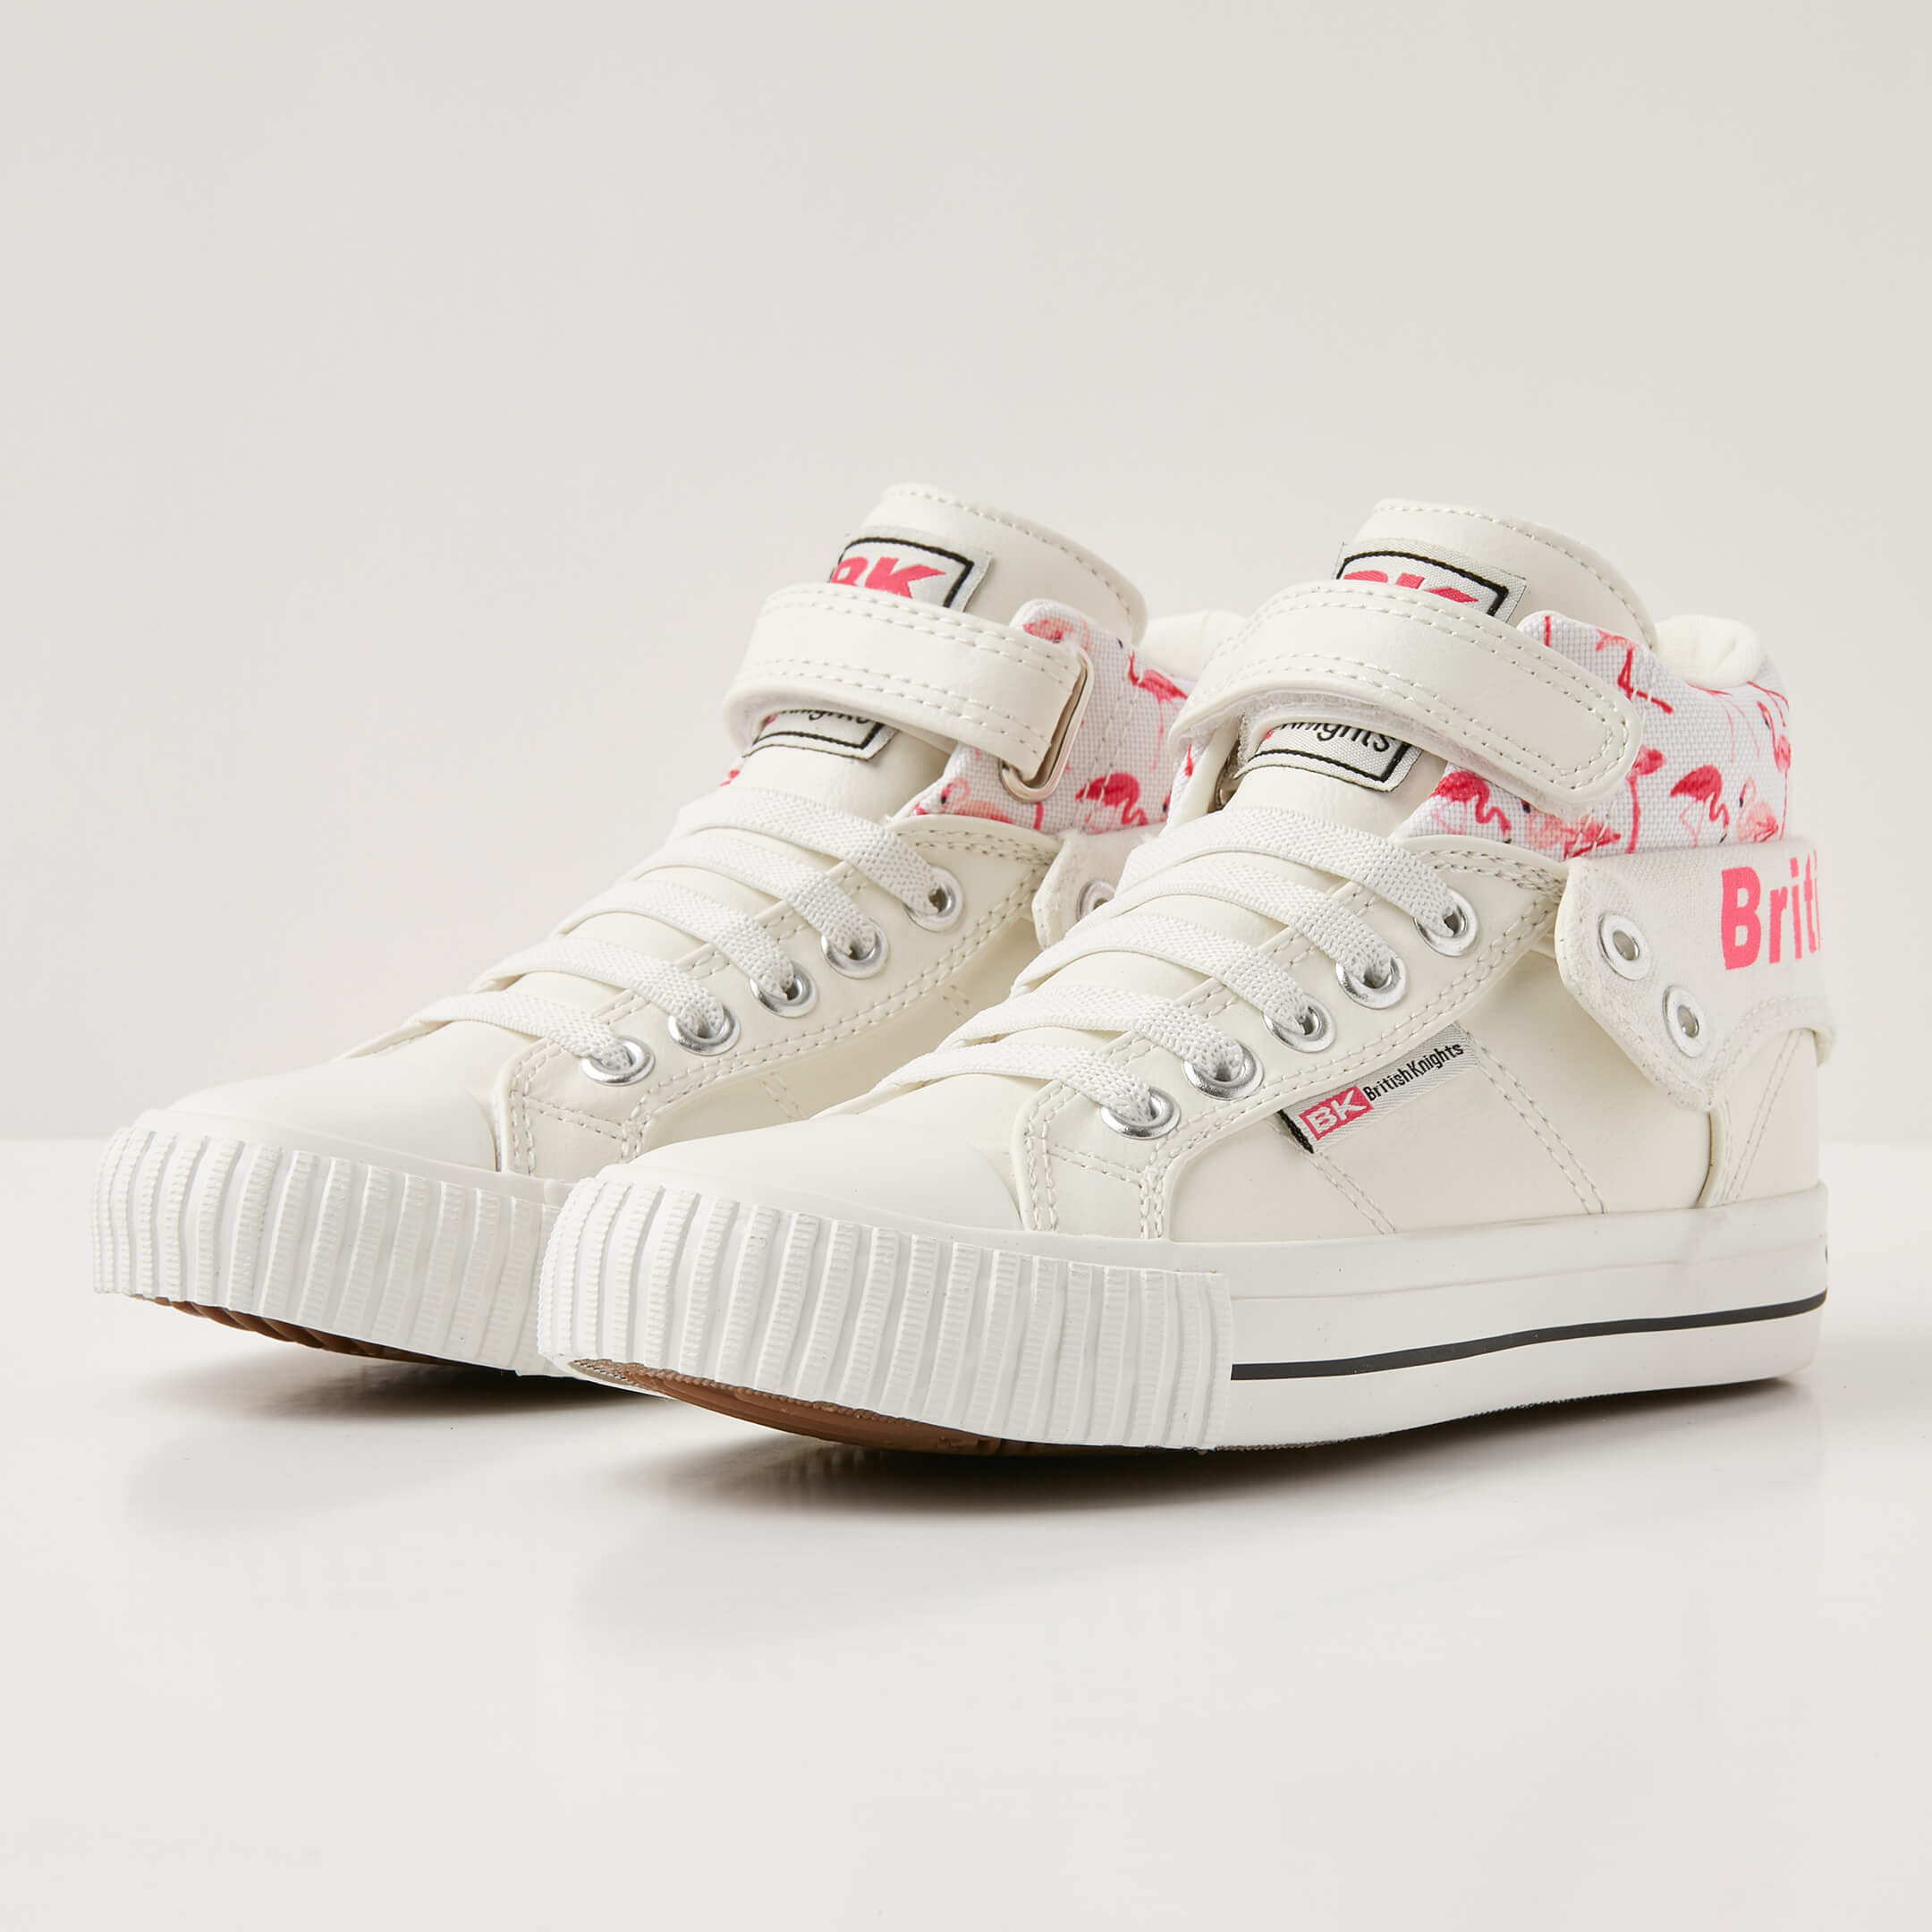 British Knights Sneaker Front view  B43-3704C-01 ROCO HIGH-TOP FEMALE